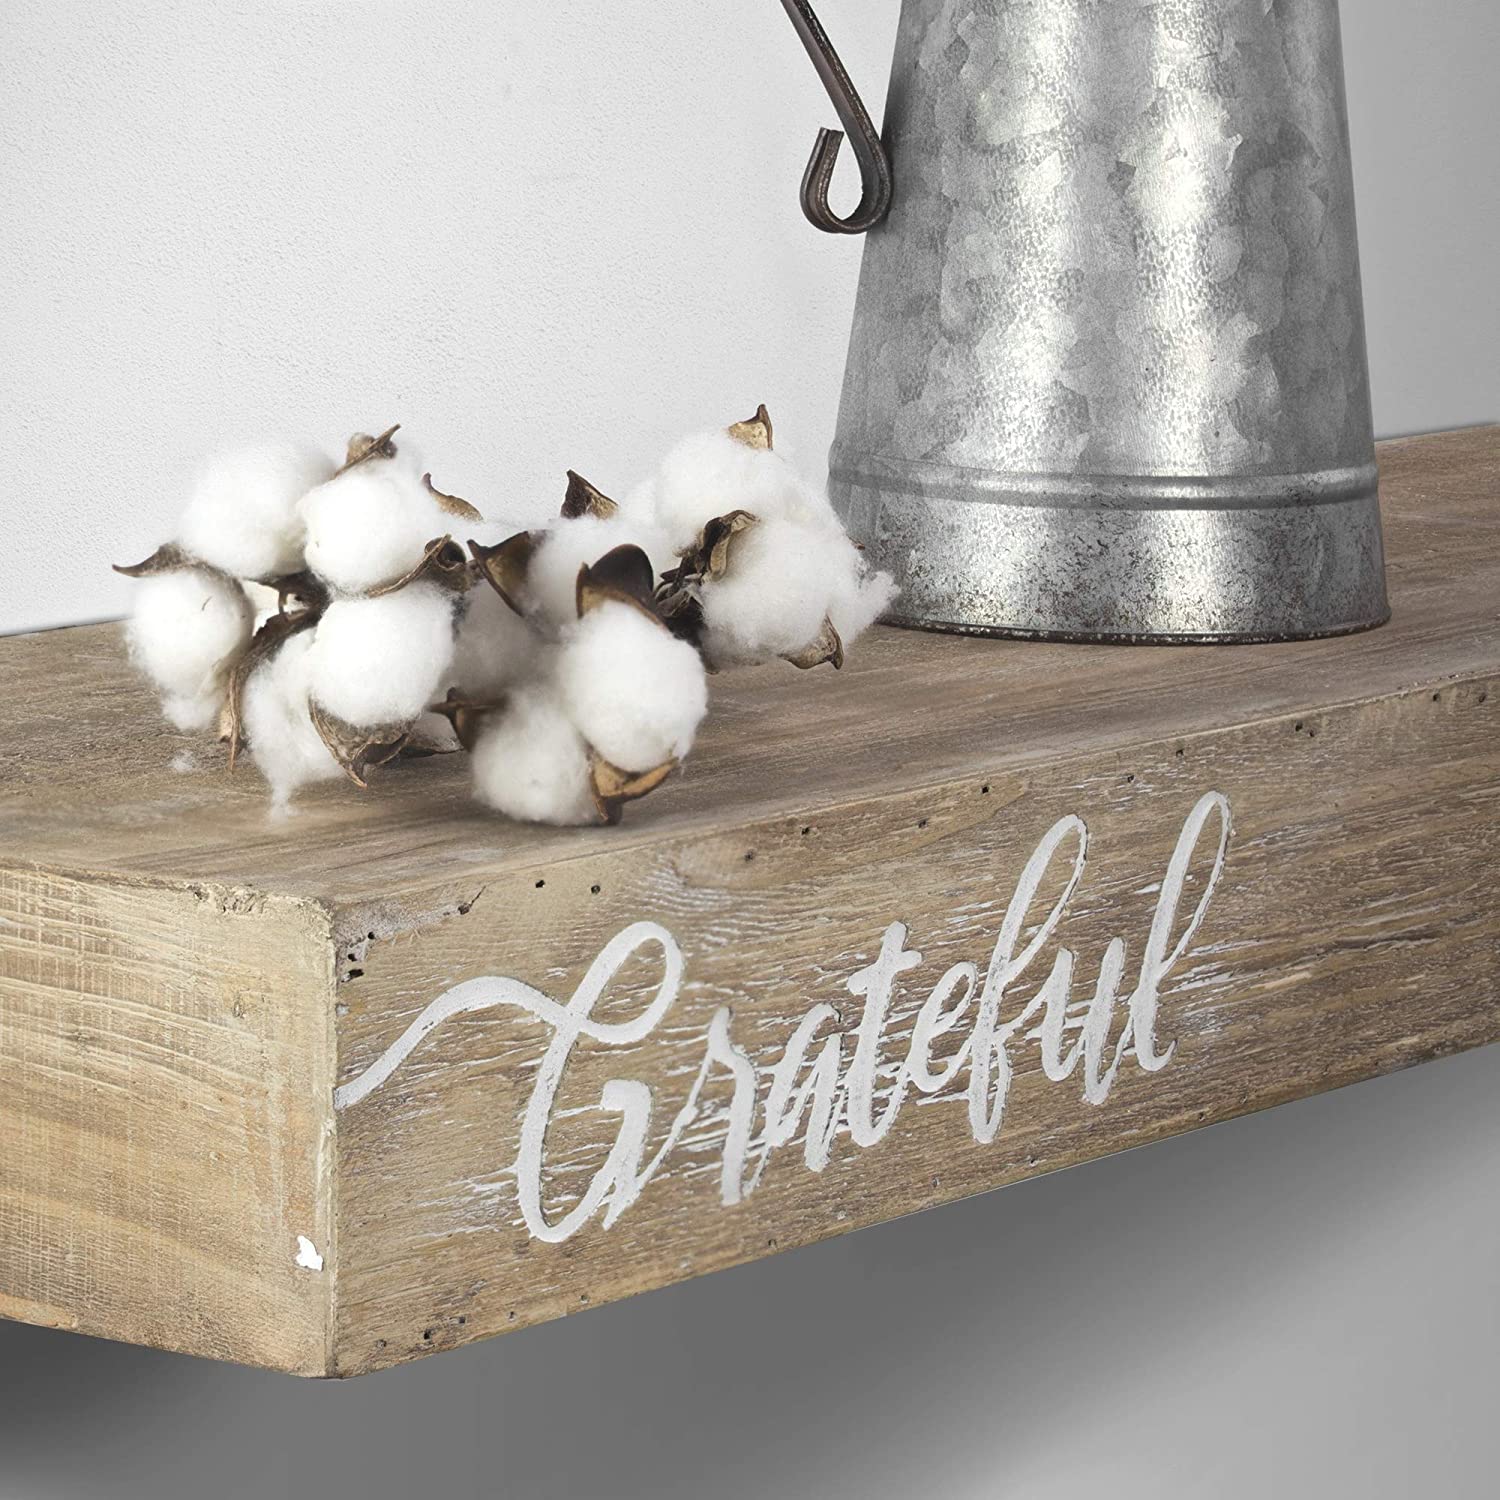 MISC Floating Wall Shelf Grateful Text Engraving Brown Wood